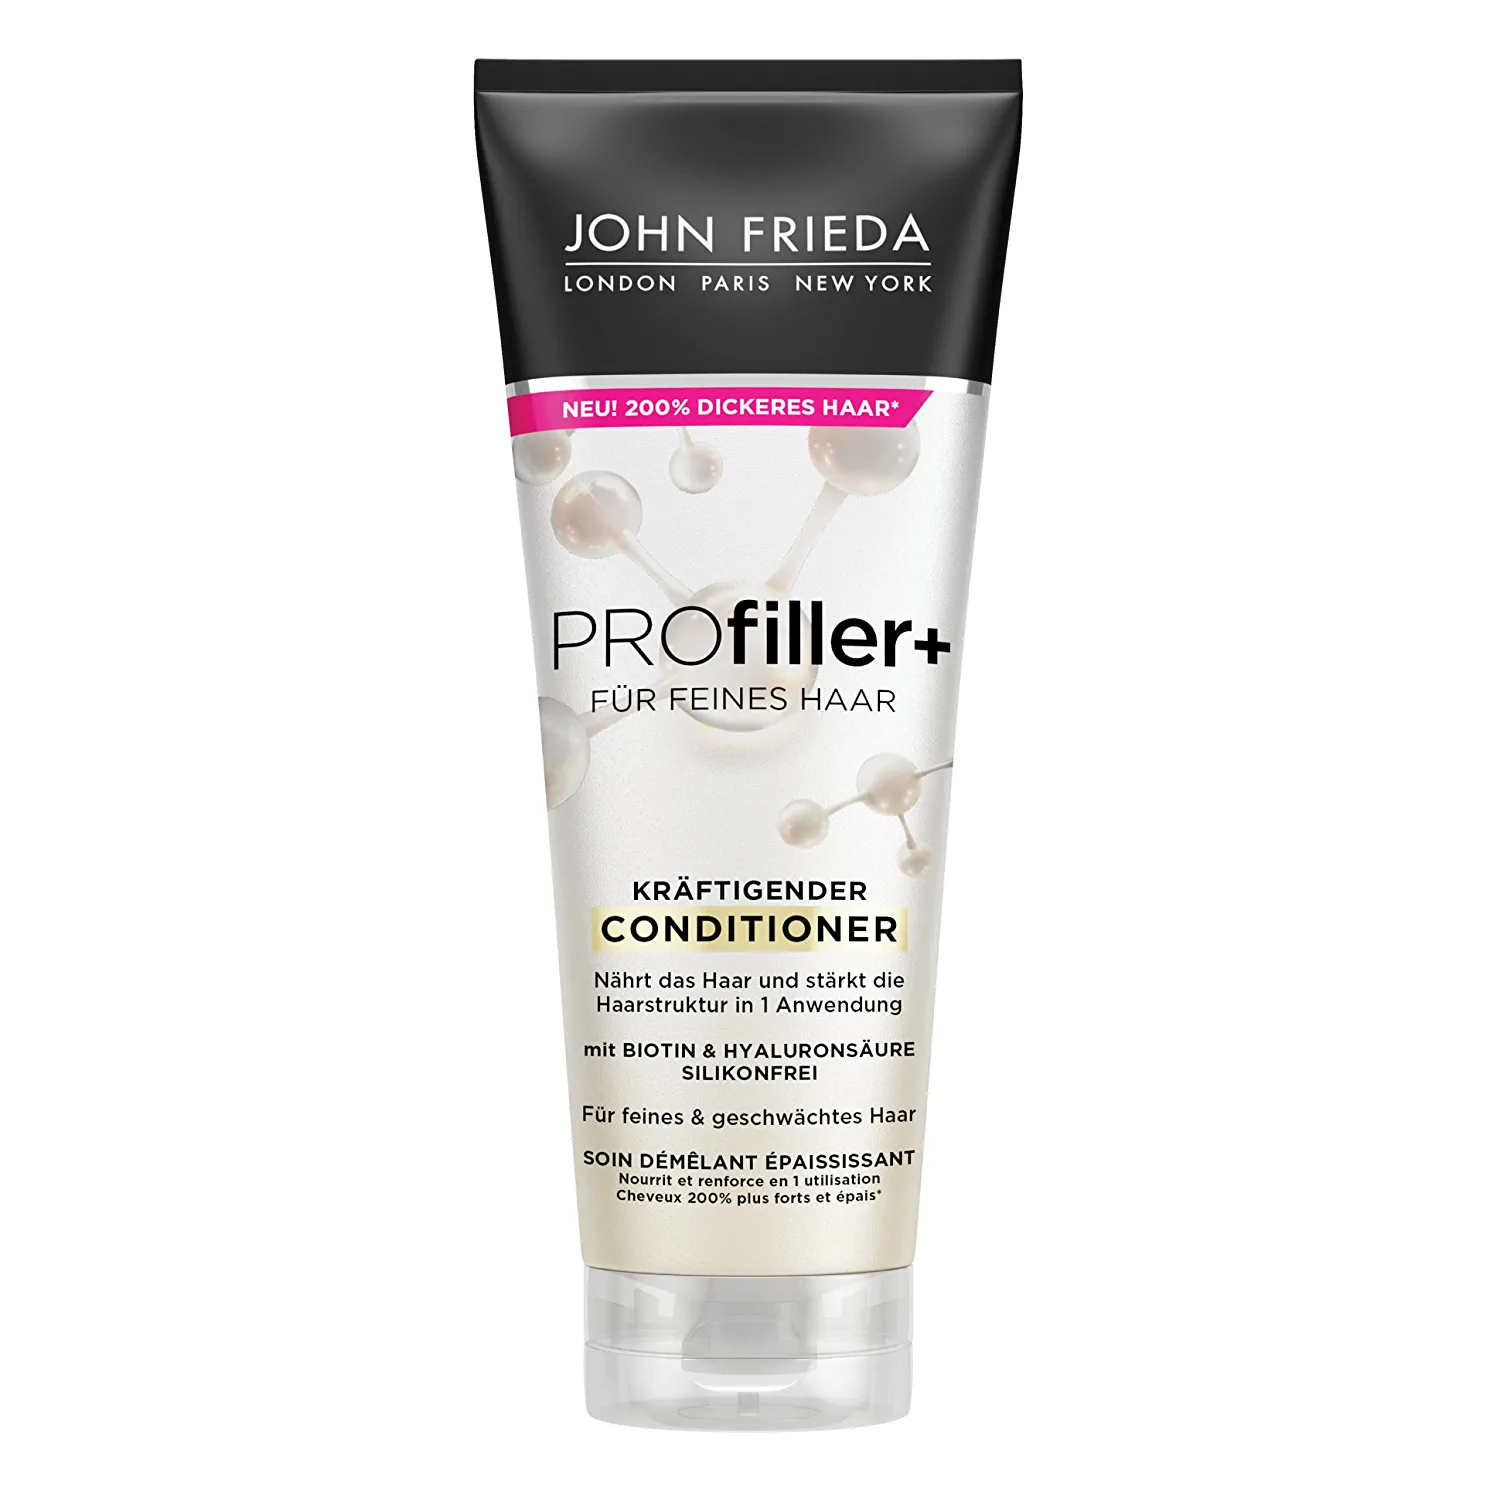 John Frieda Profiller+ Conditioner - Contents: 250 ml - Hair type: fine, weakened - Nourishes the hair - Silicone-free, ‎white